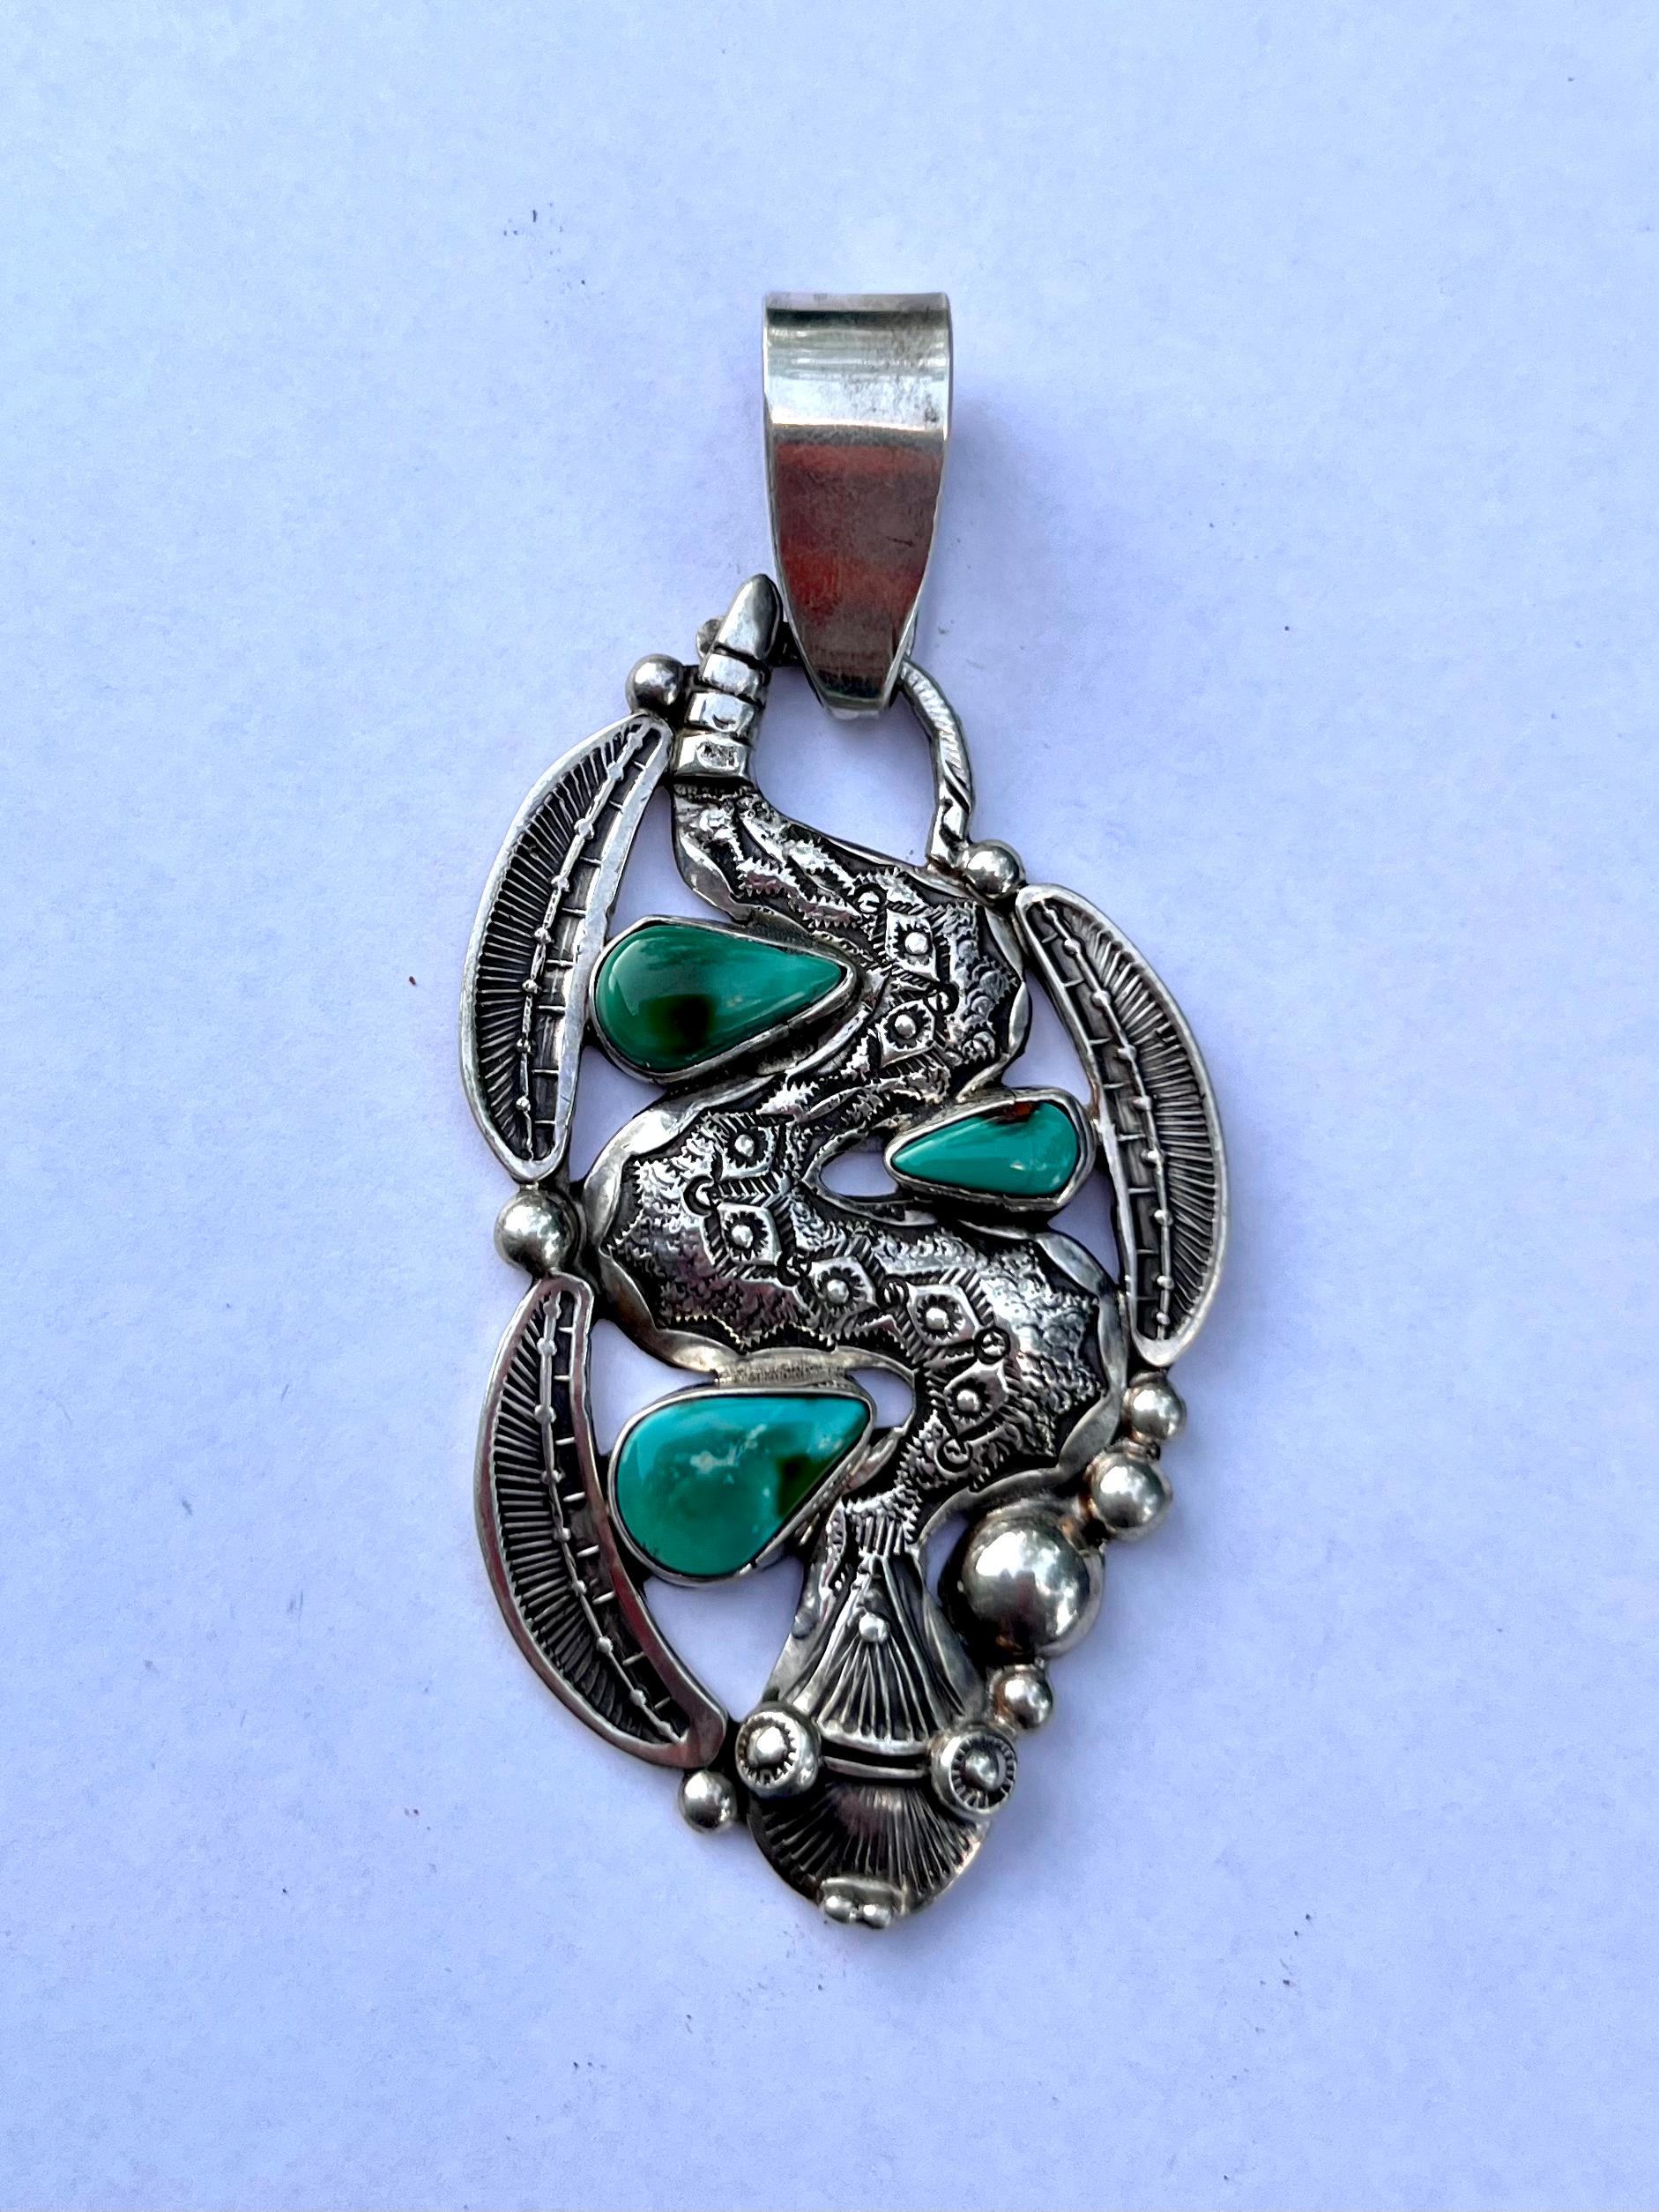 Vintage Native American Turquoise & Sterling Silver Snake Pendant by Art Tafoya In Good Condition For Sale In Greenport, NY